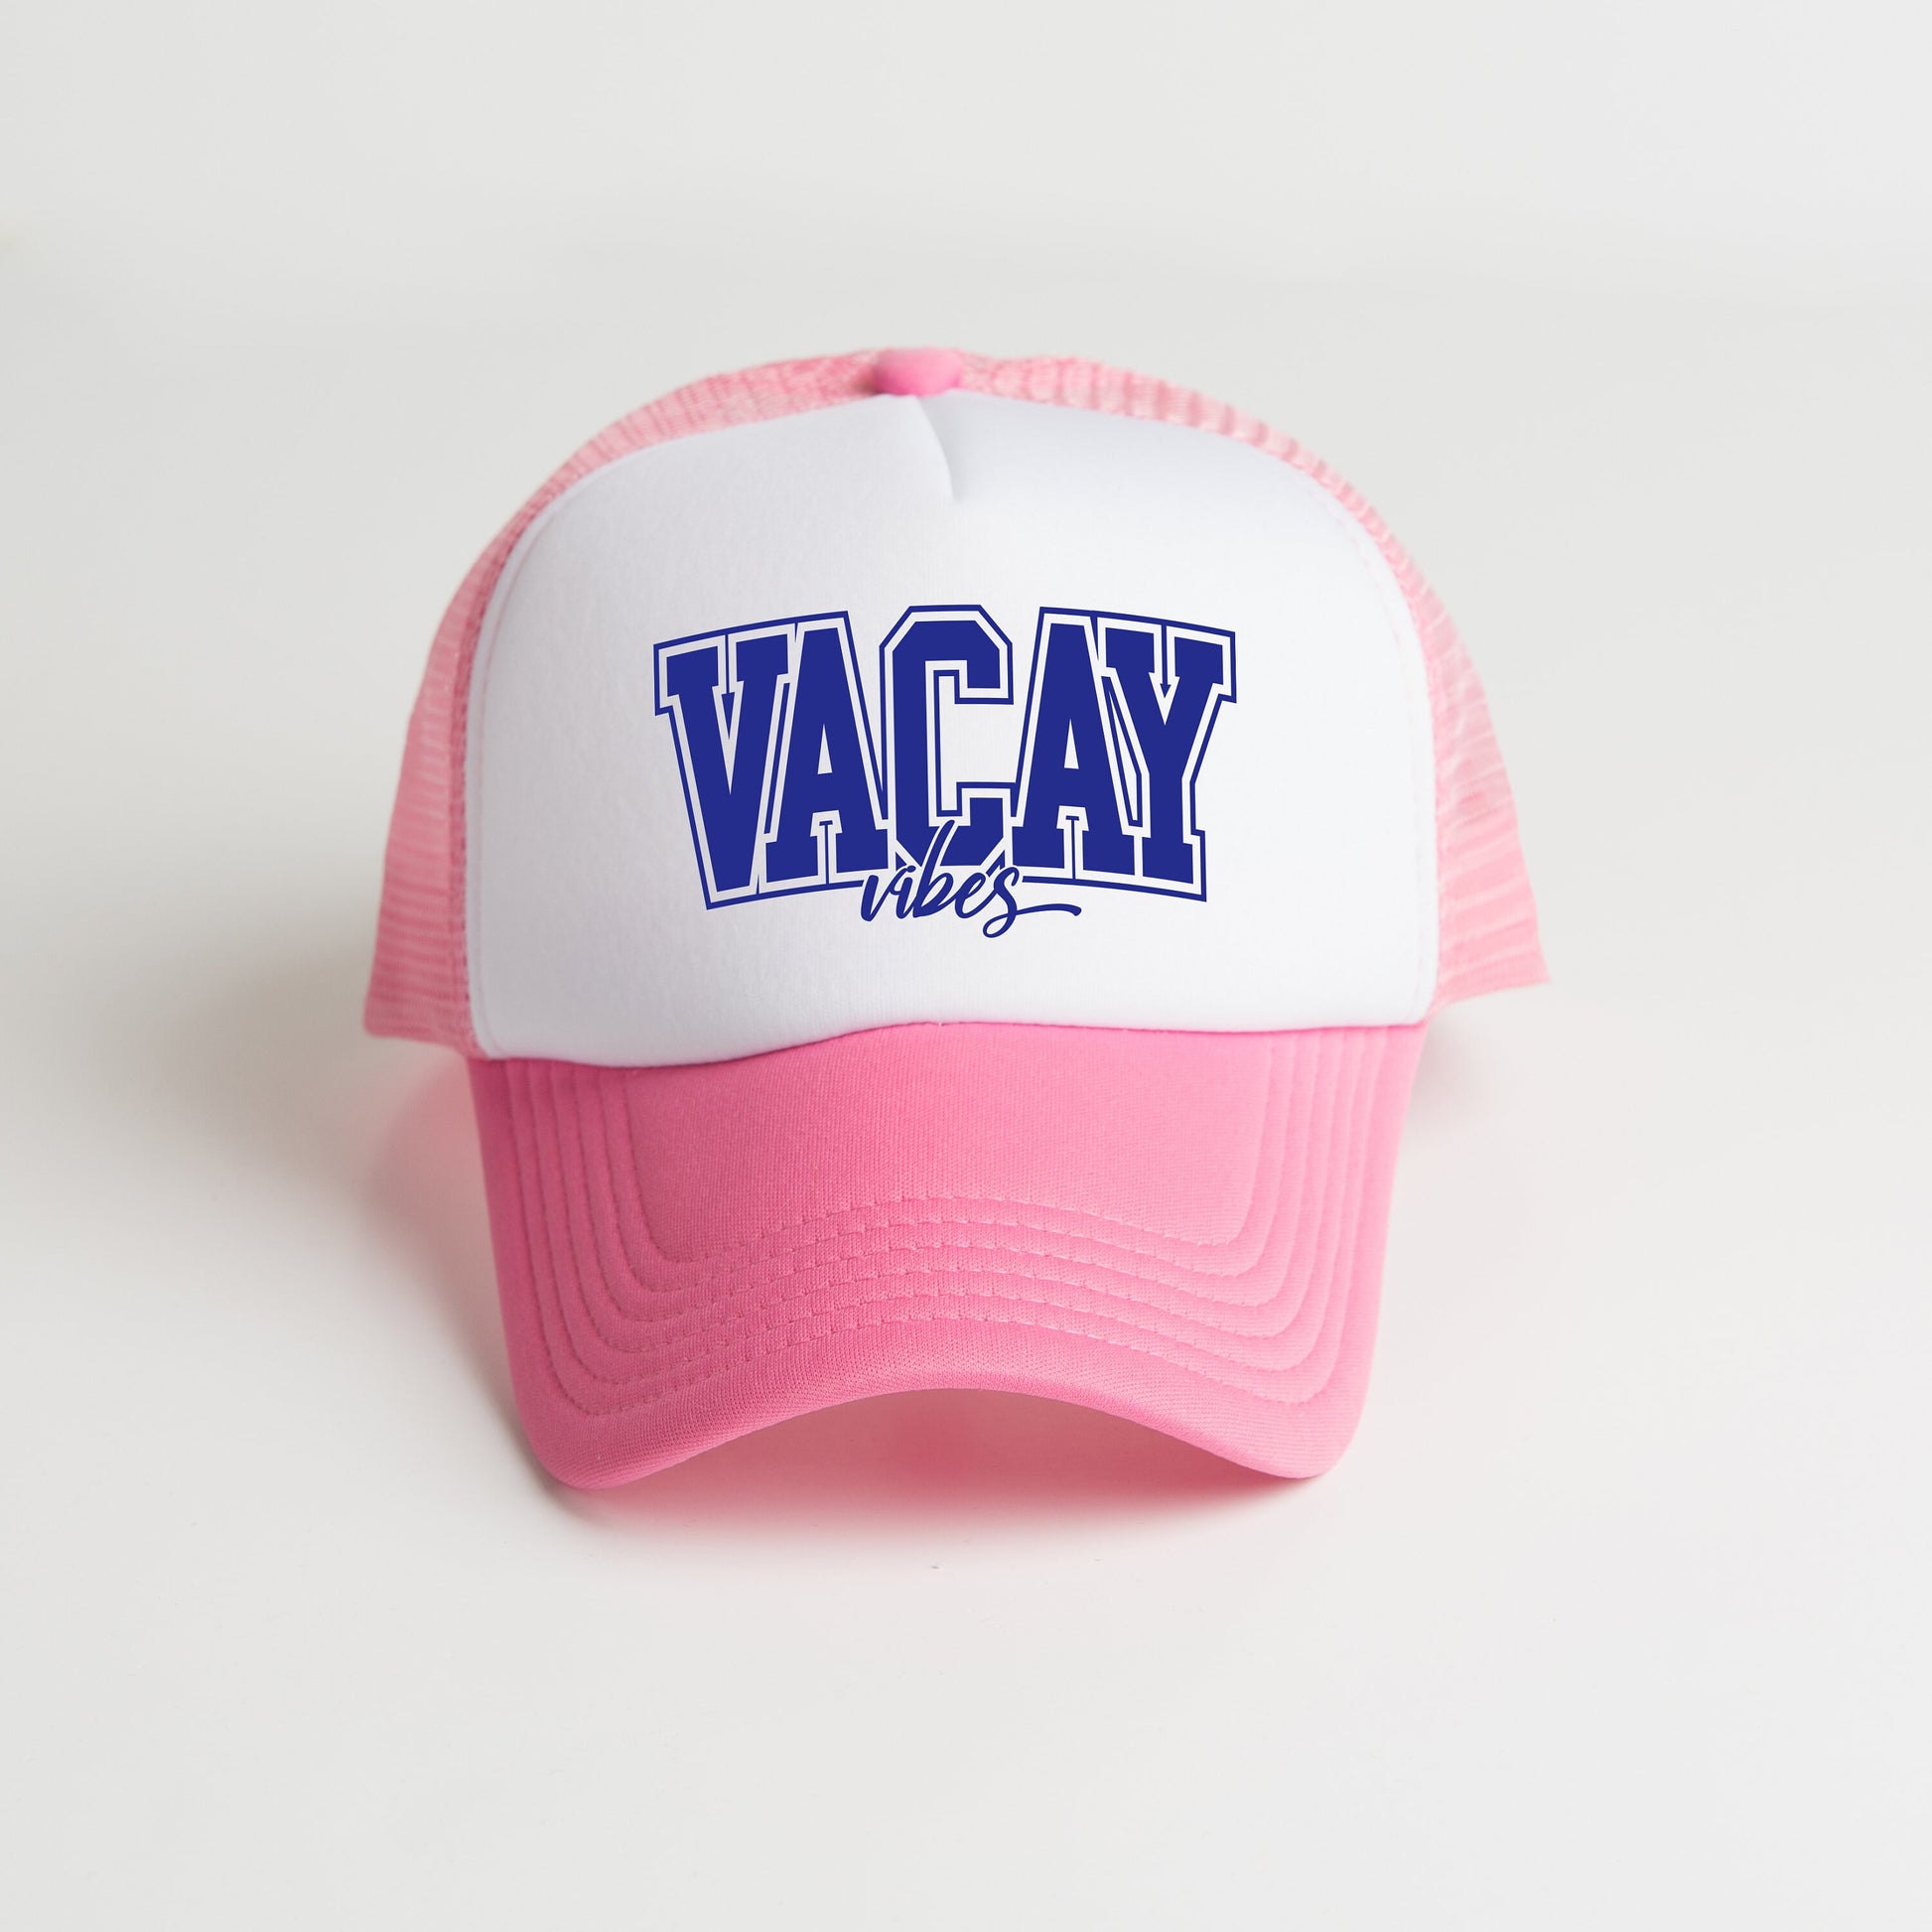 a pink and white hat with the word vacay on it